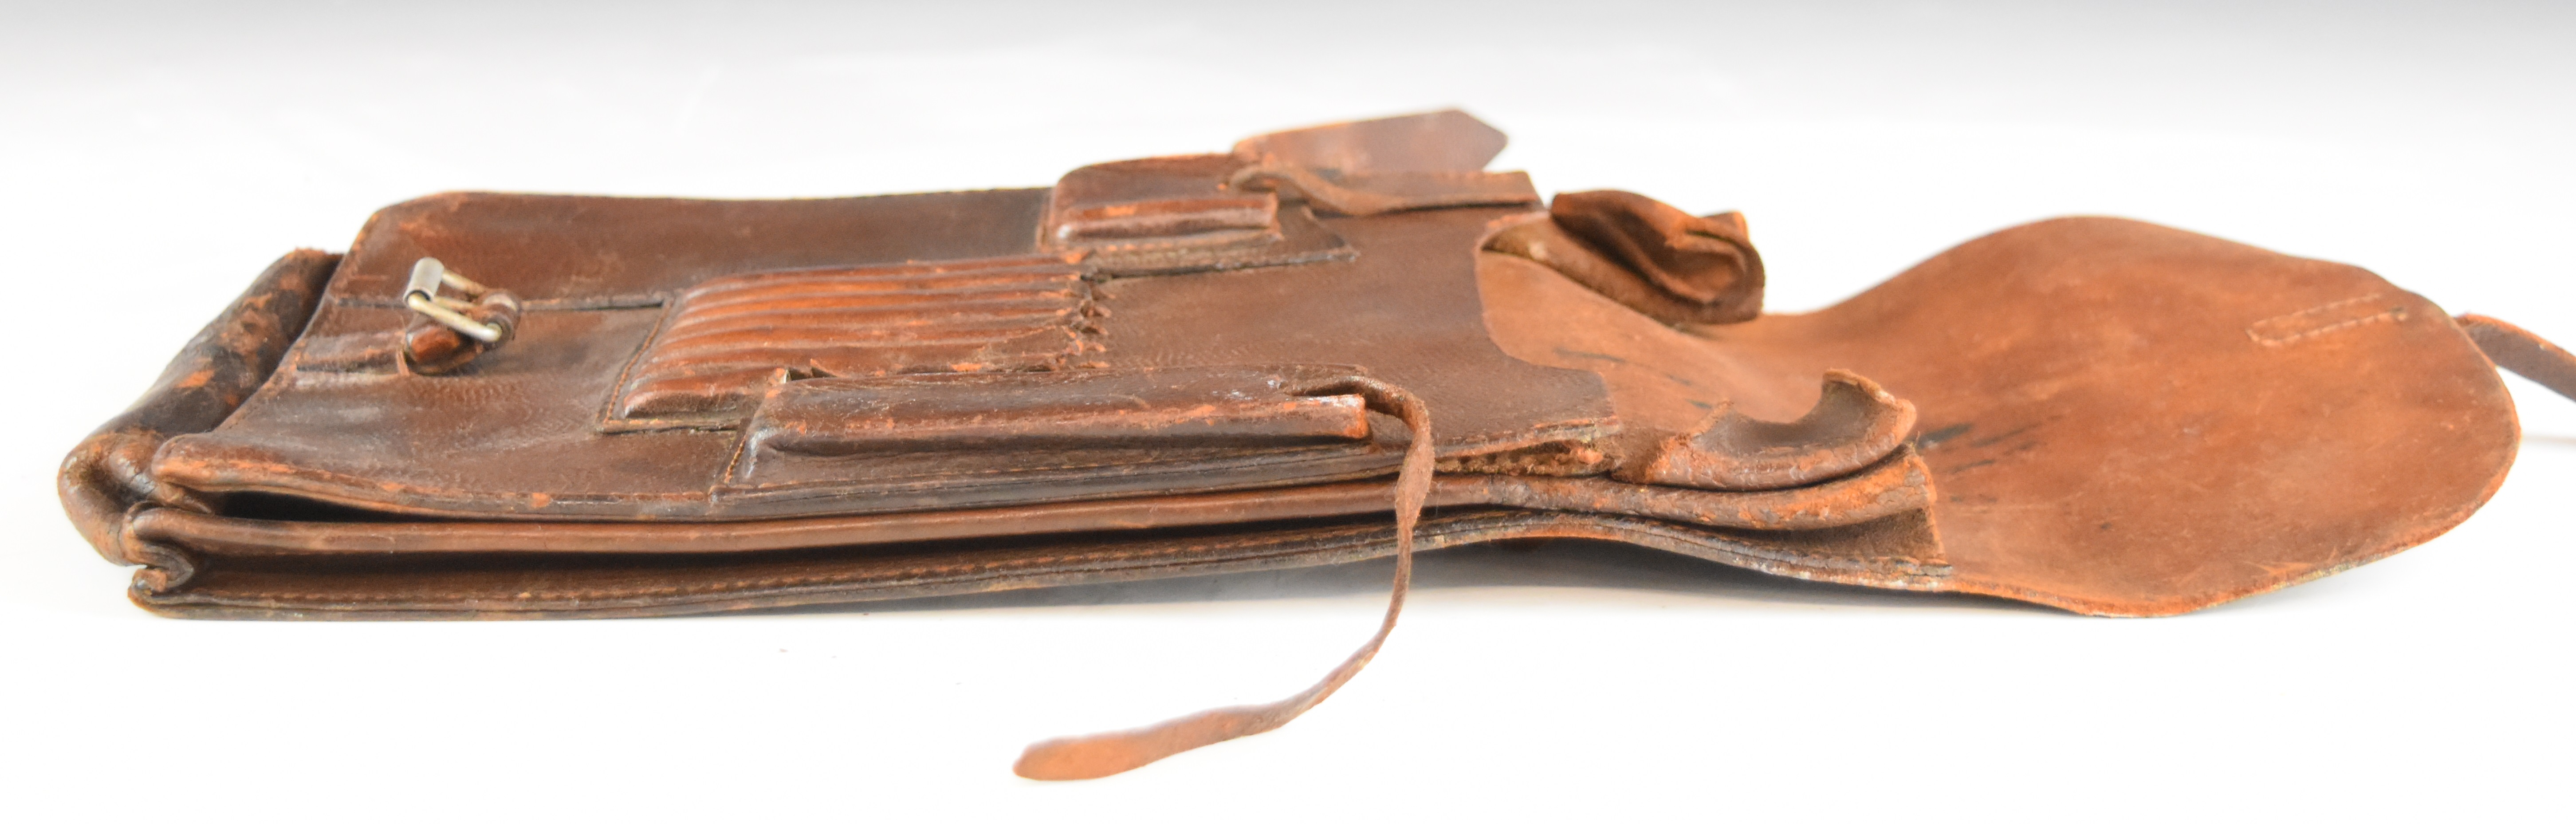 German WW2 brown leather map case with two section inner, leather securing straps and alloy buckles - Image 3 of 4